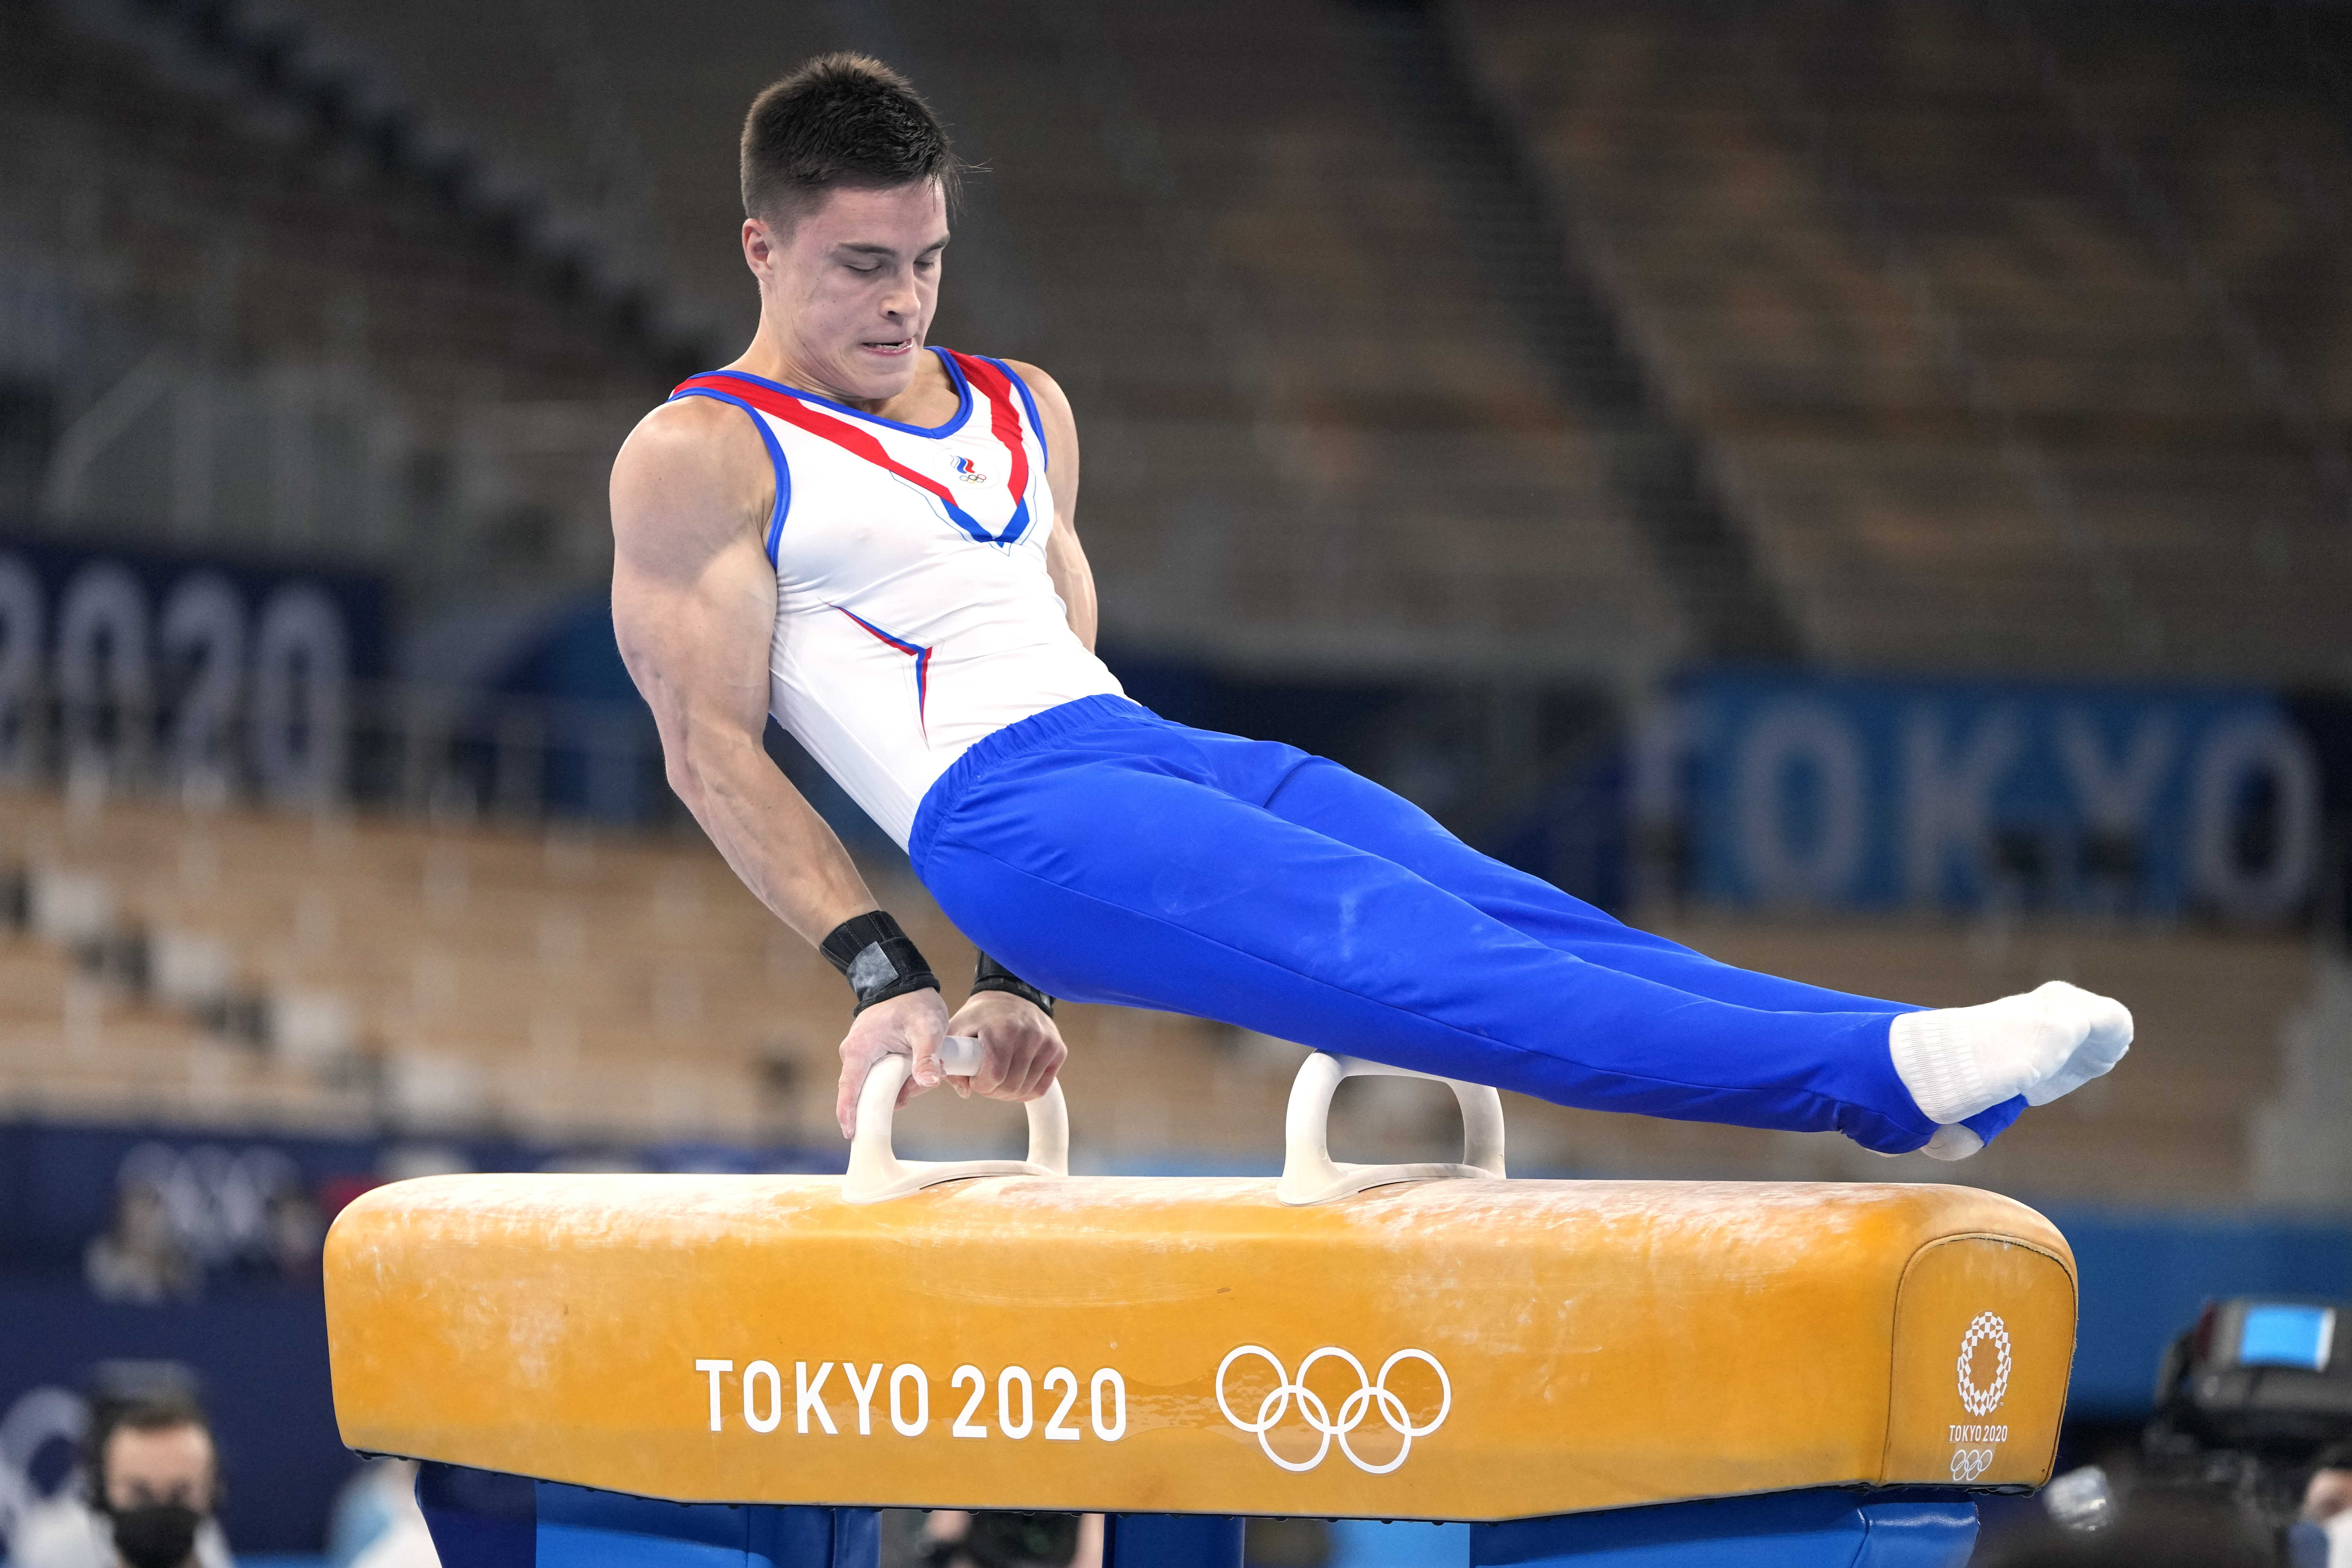 Olympic Men S Gymnastics 21 Team All Around Medal Winners And Scores Bleacher Report Latest News Videos And Highlights